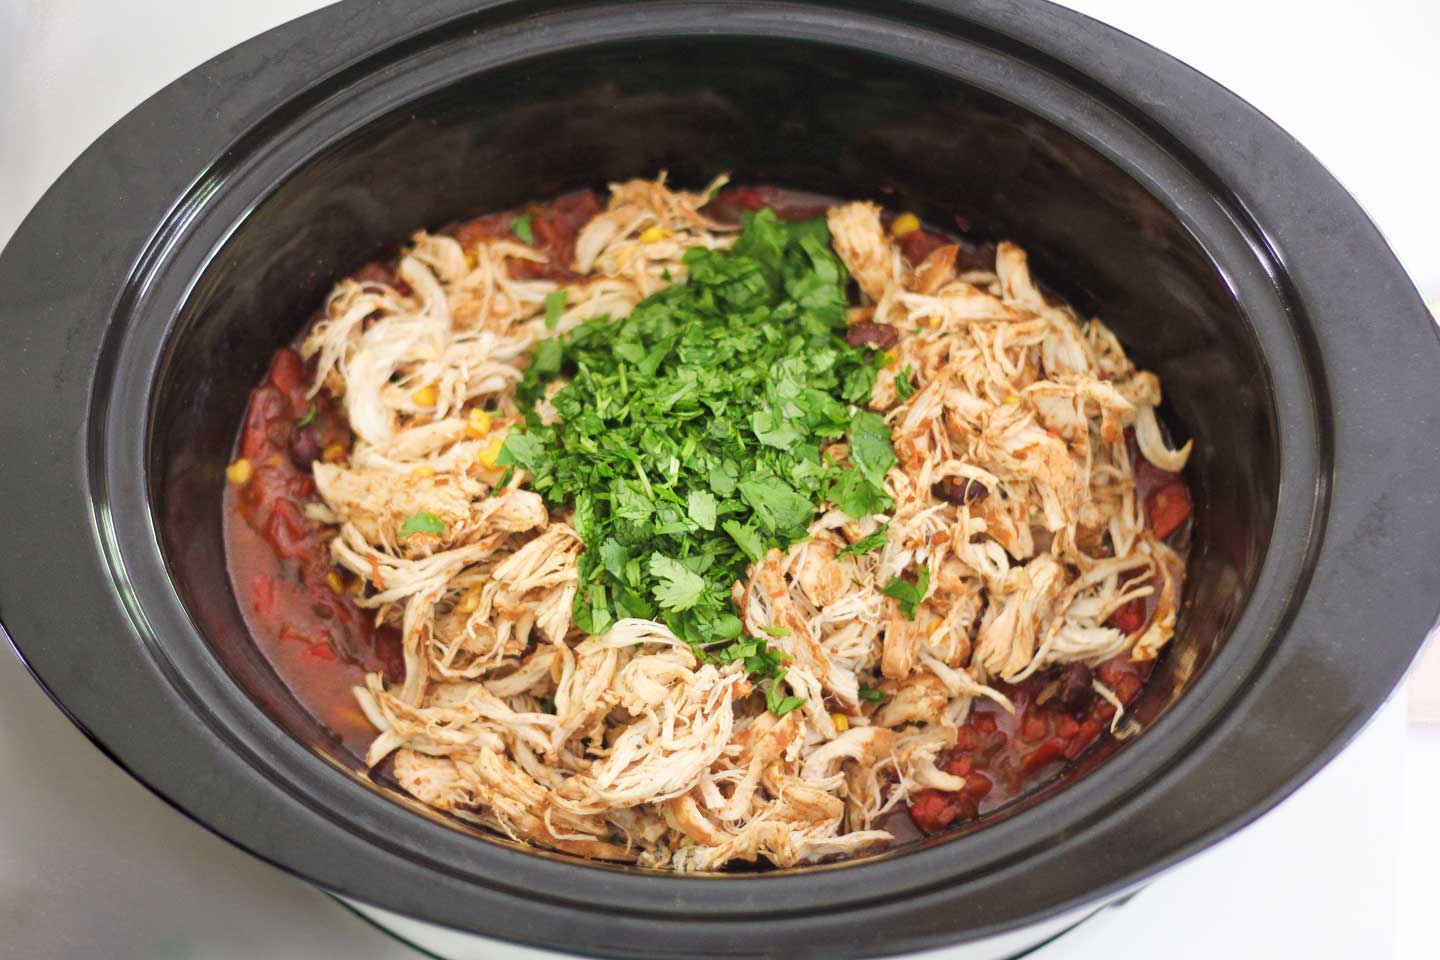 Overhead look into slow cooker showing chicken and other burrito bowl ingredients that are ready to be cooked.